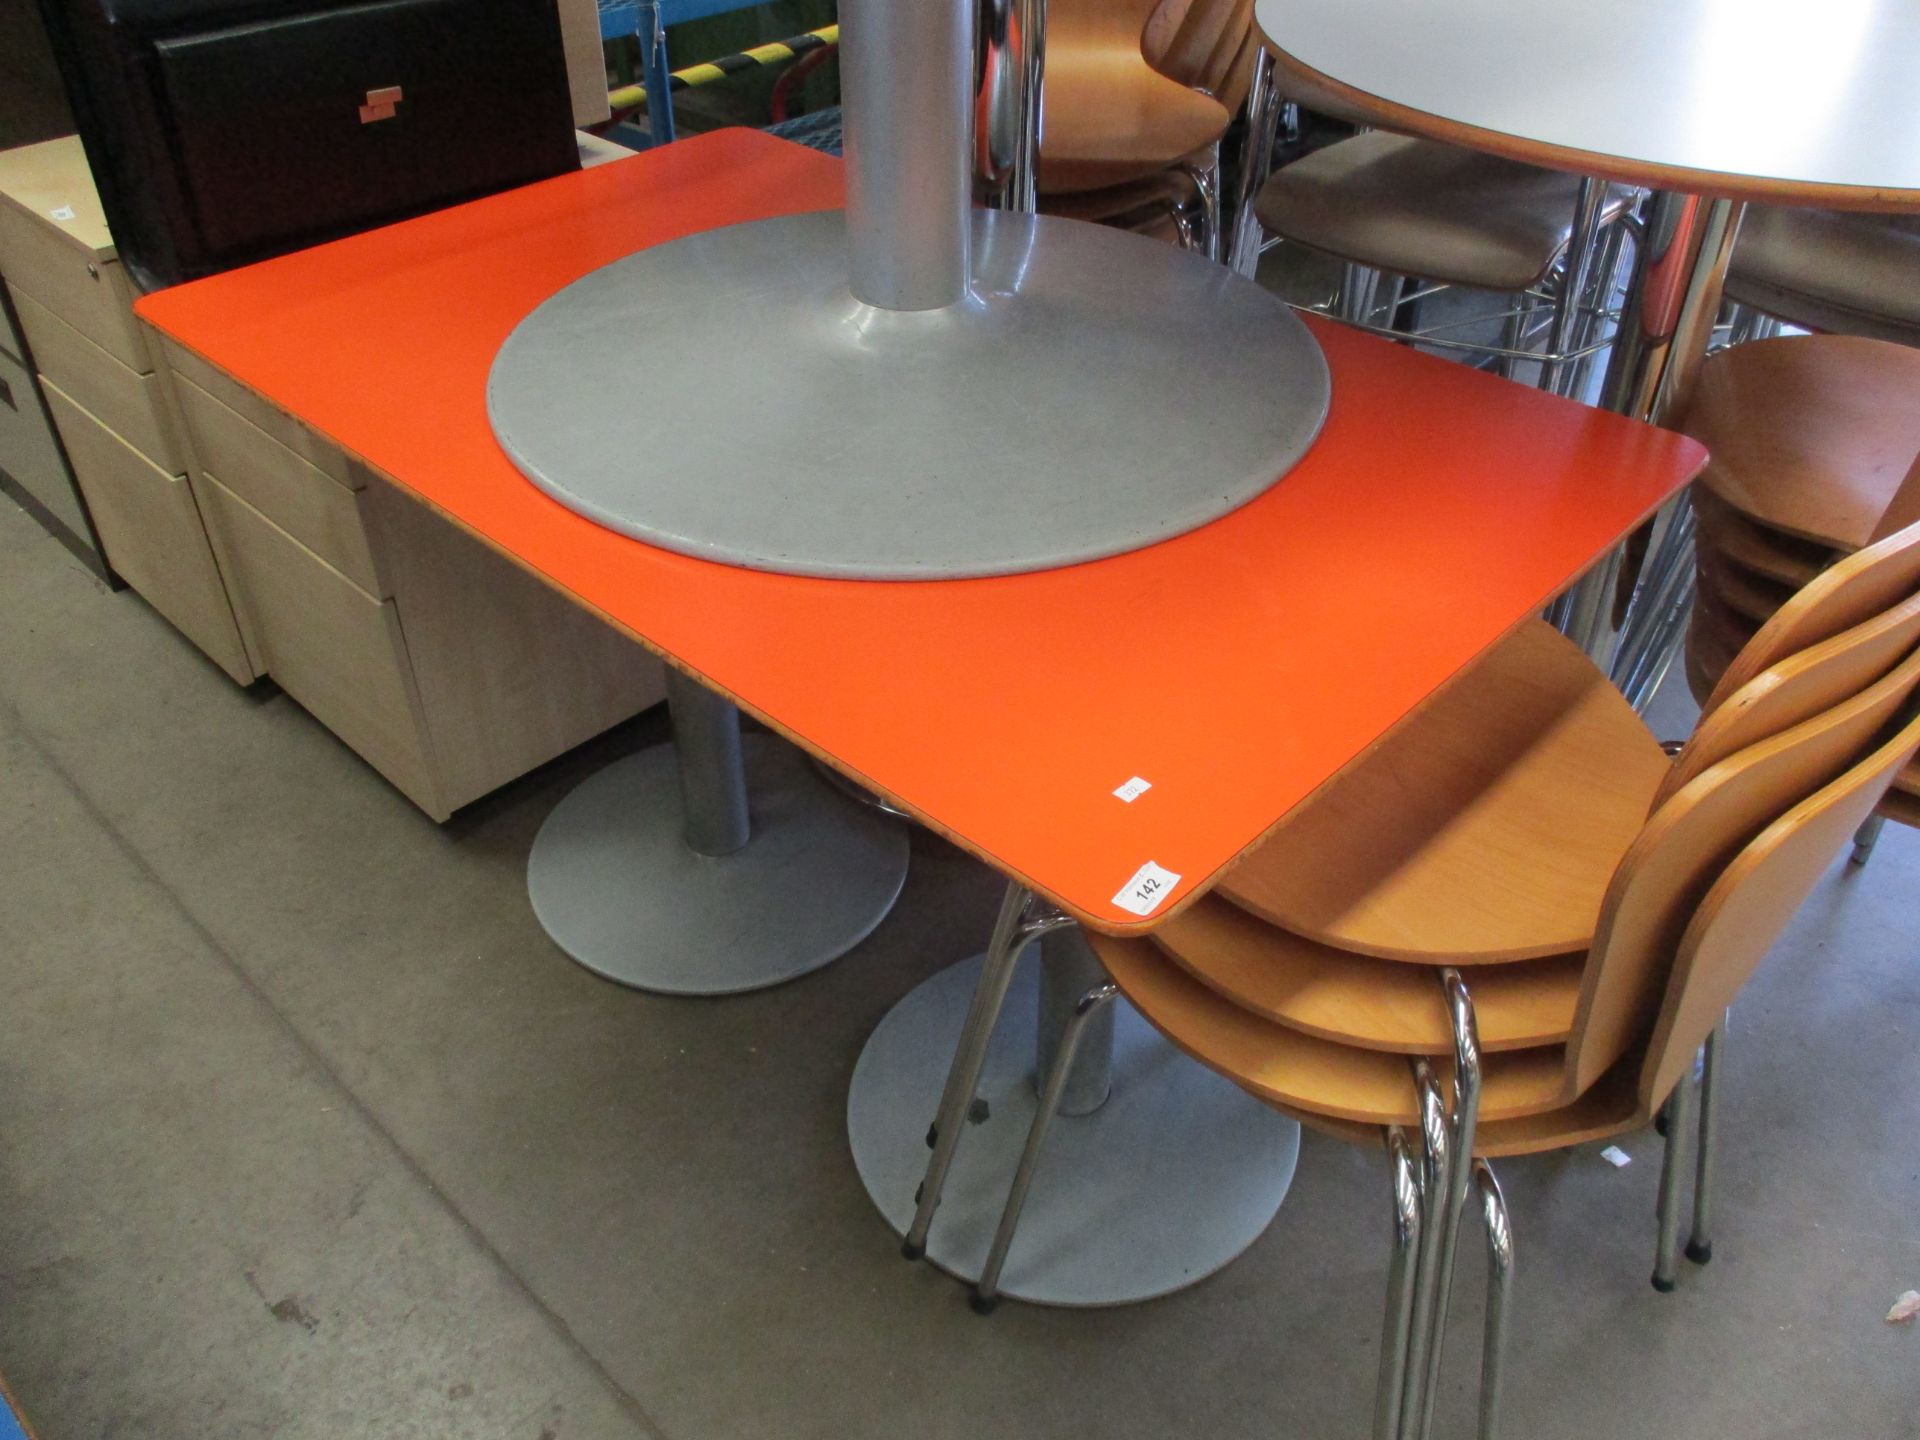 An orange wooden cafe table 74 x 120cm on two colum bases